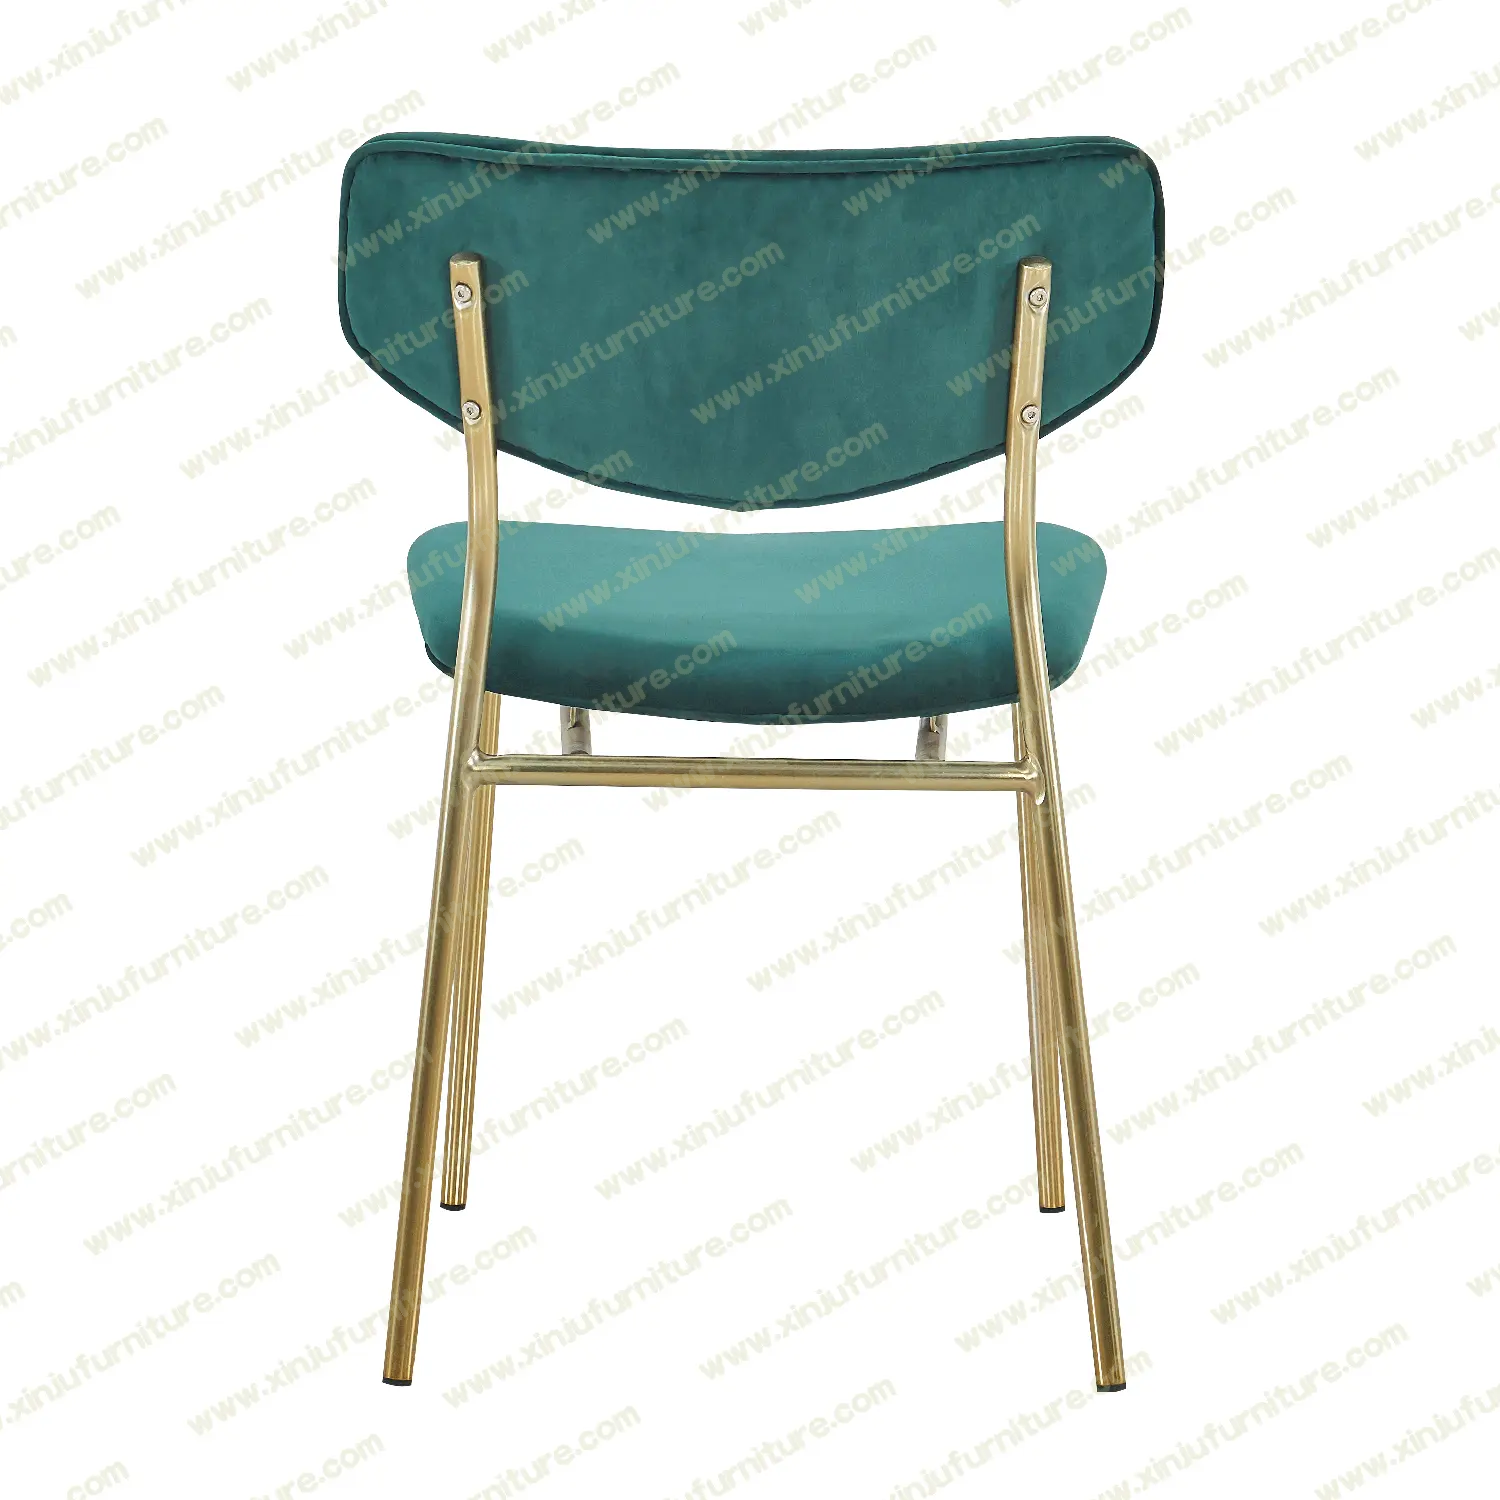 Simple and comfortable dining chair without armrest